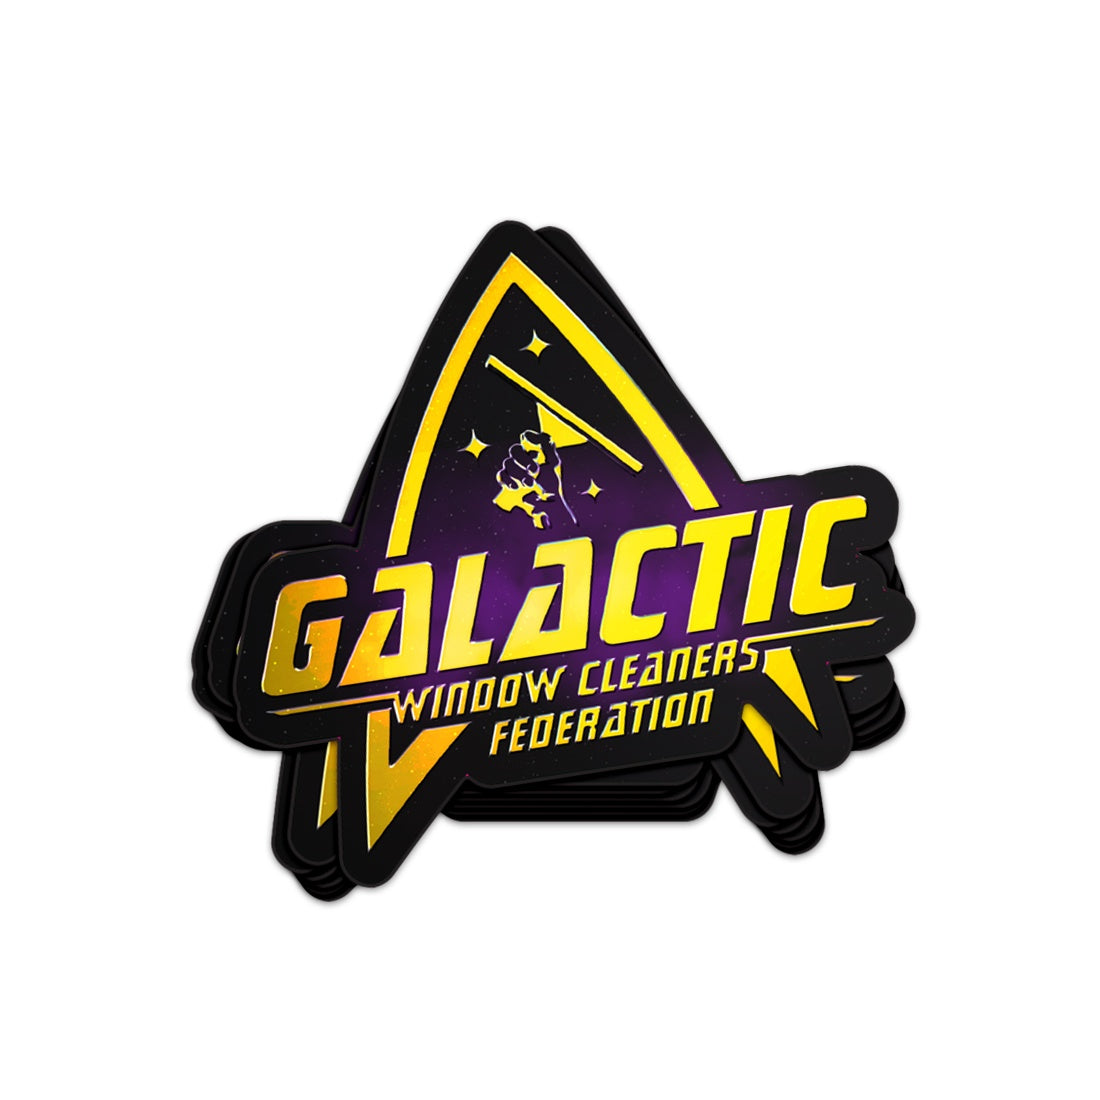 Galactic Window Cleaners Federation Membership Badge Sticker - Stack With Tilted Top Sticker View